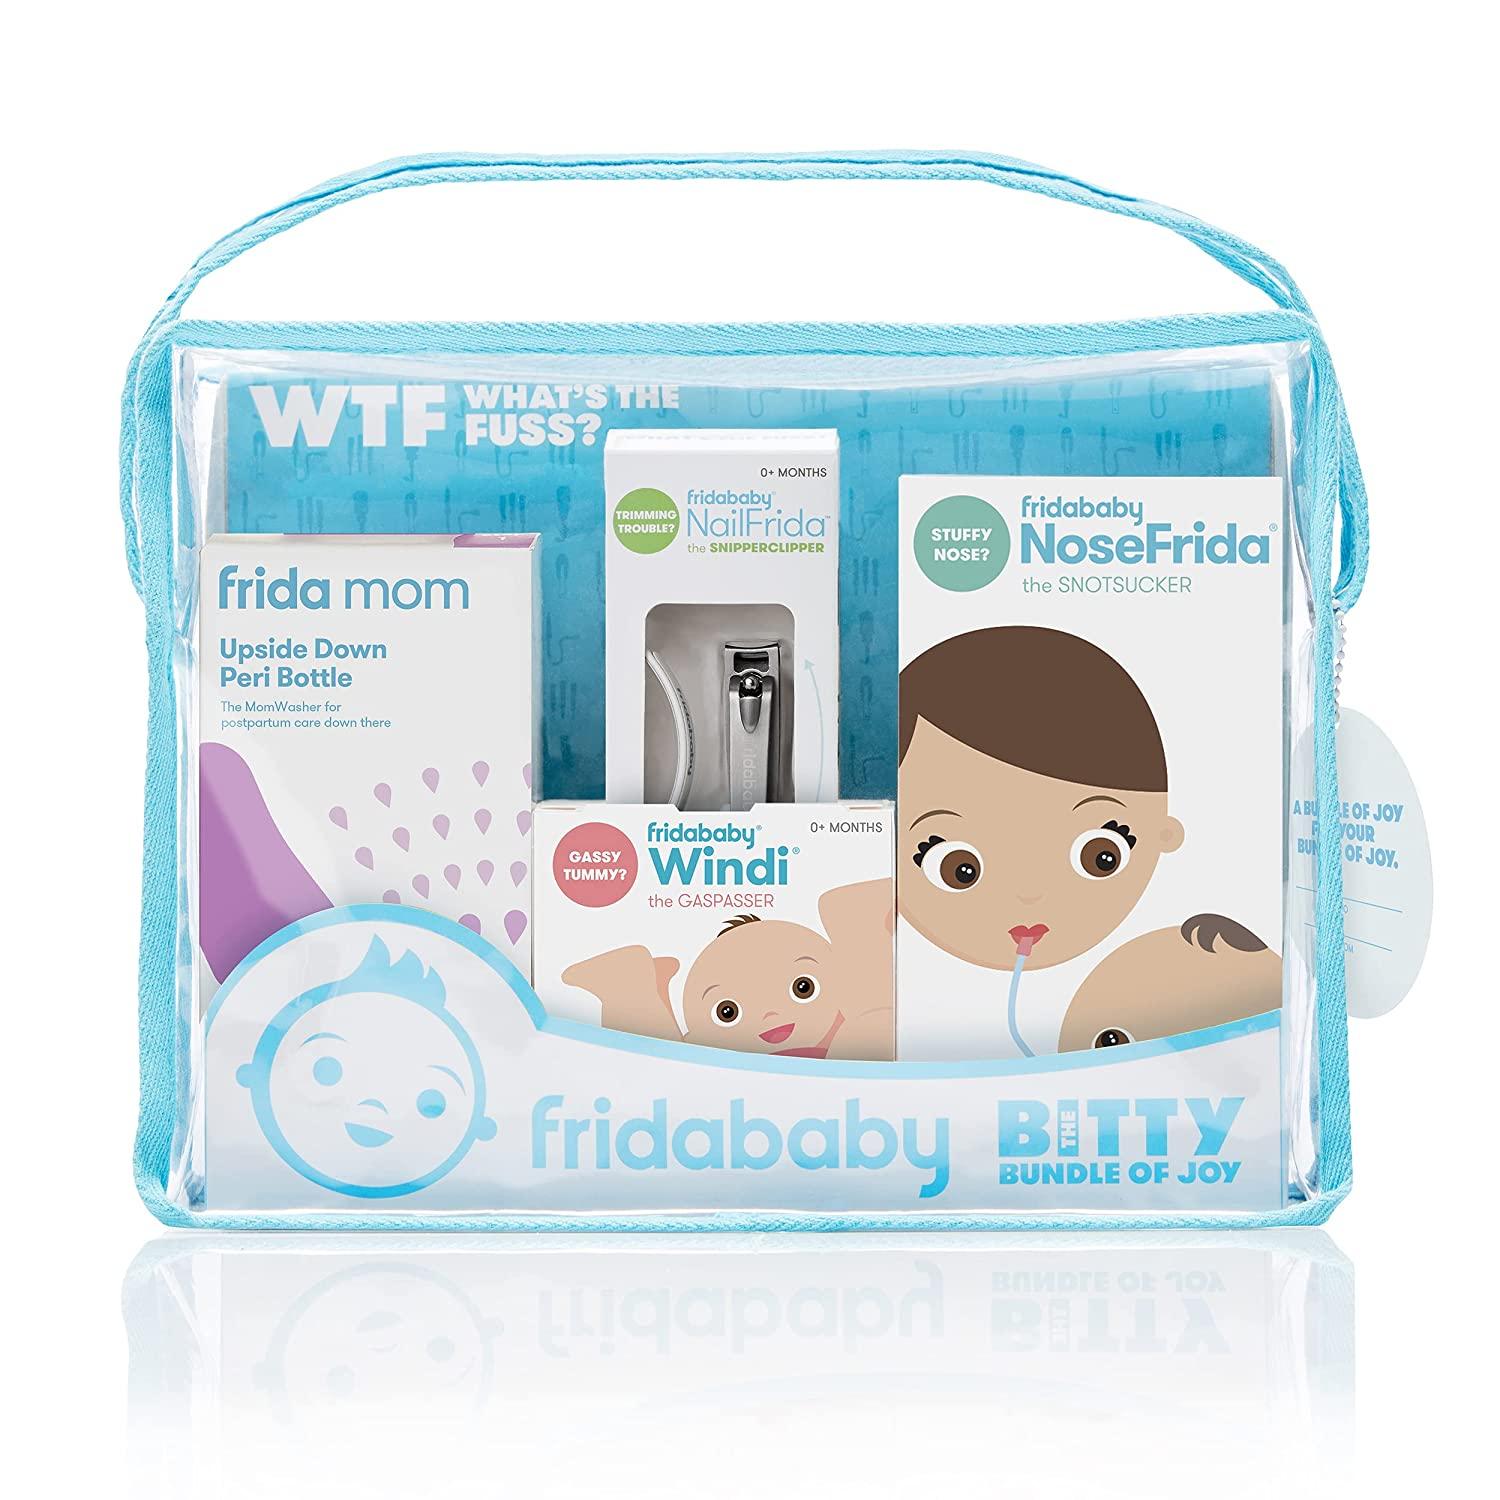 Fridababy Bitty Bundle of Joy Mom Baby Healthcare Grooming Gift Kit for $30 Shipped